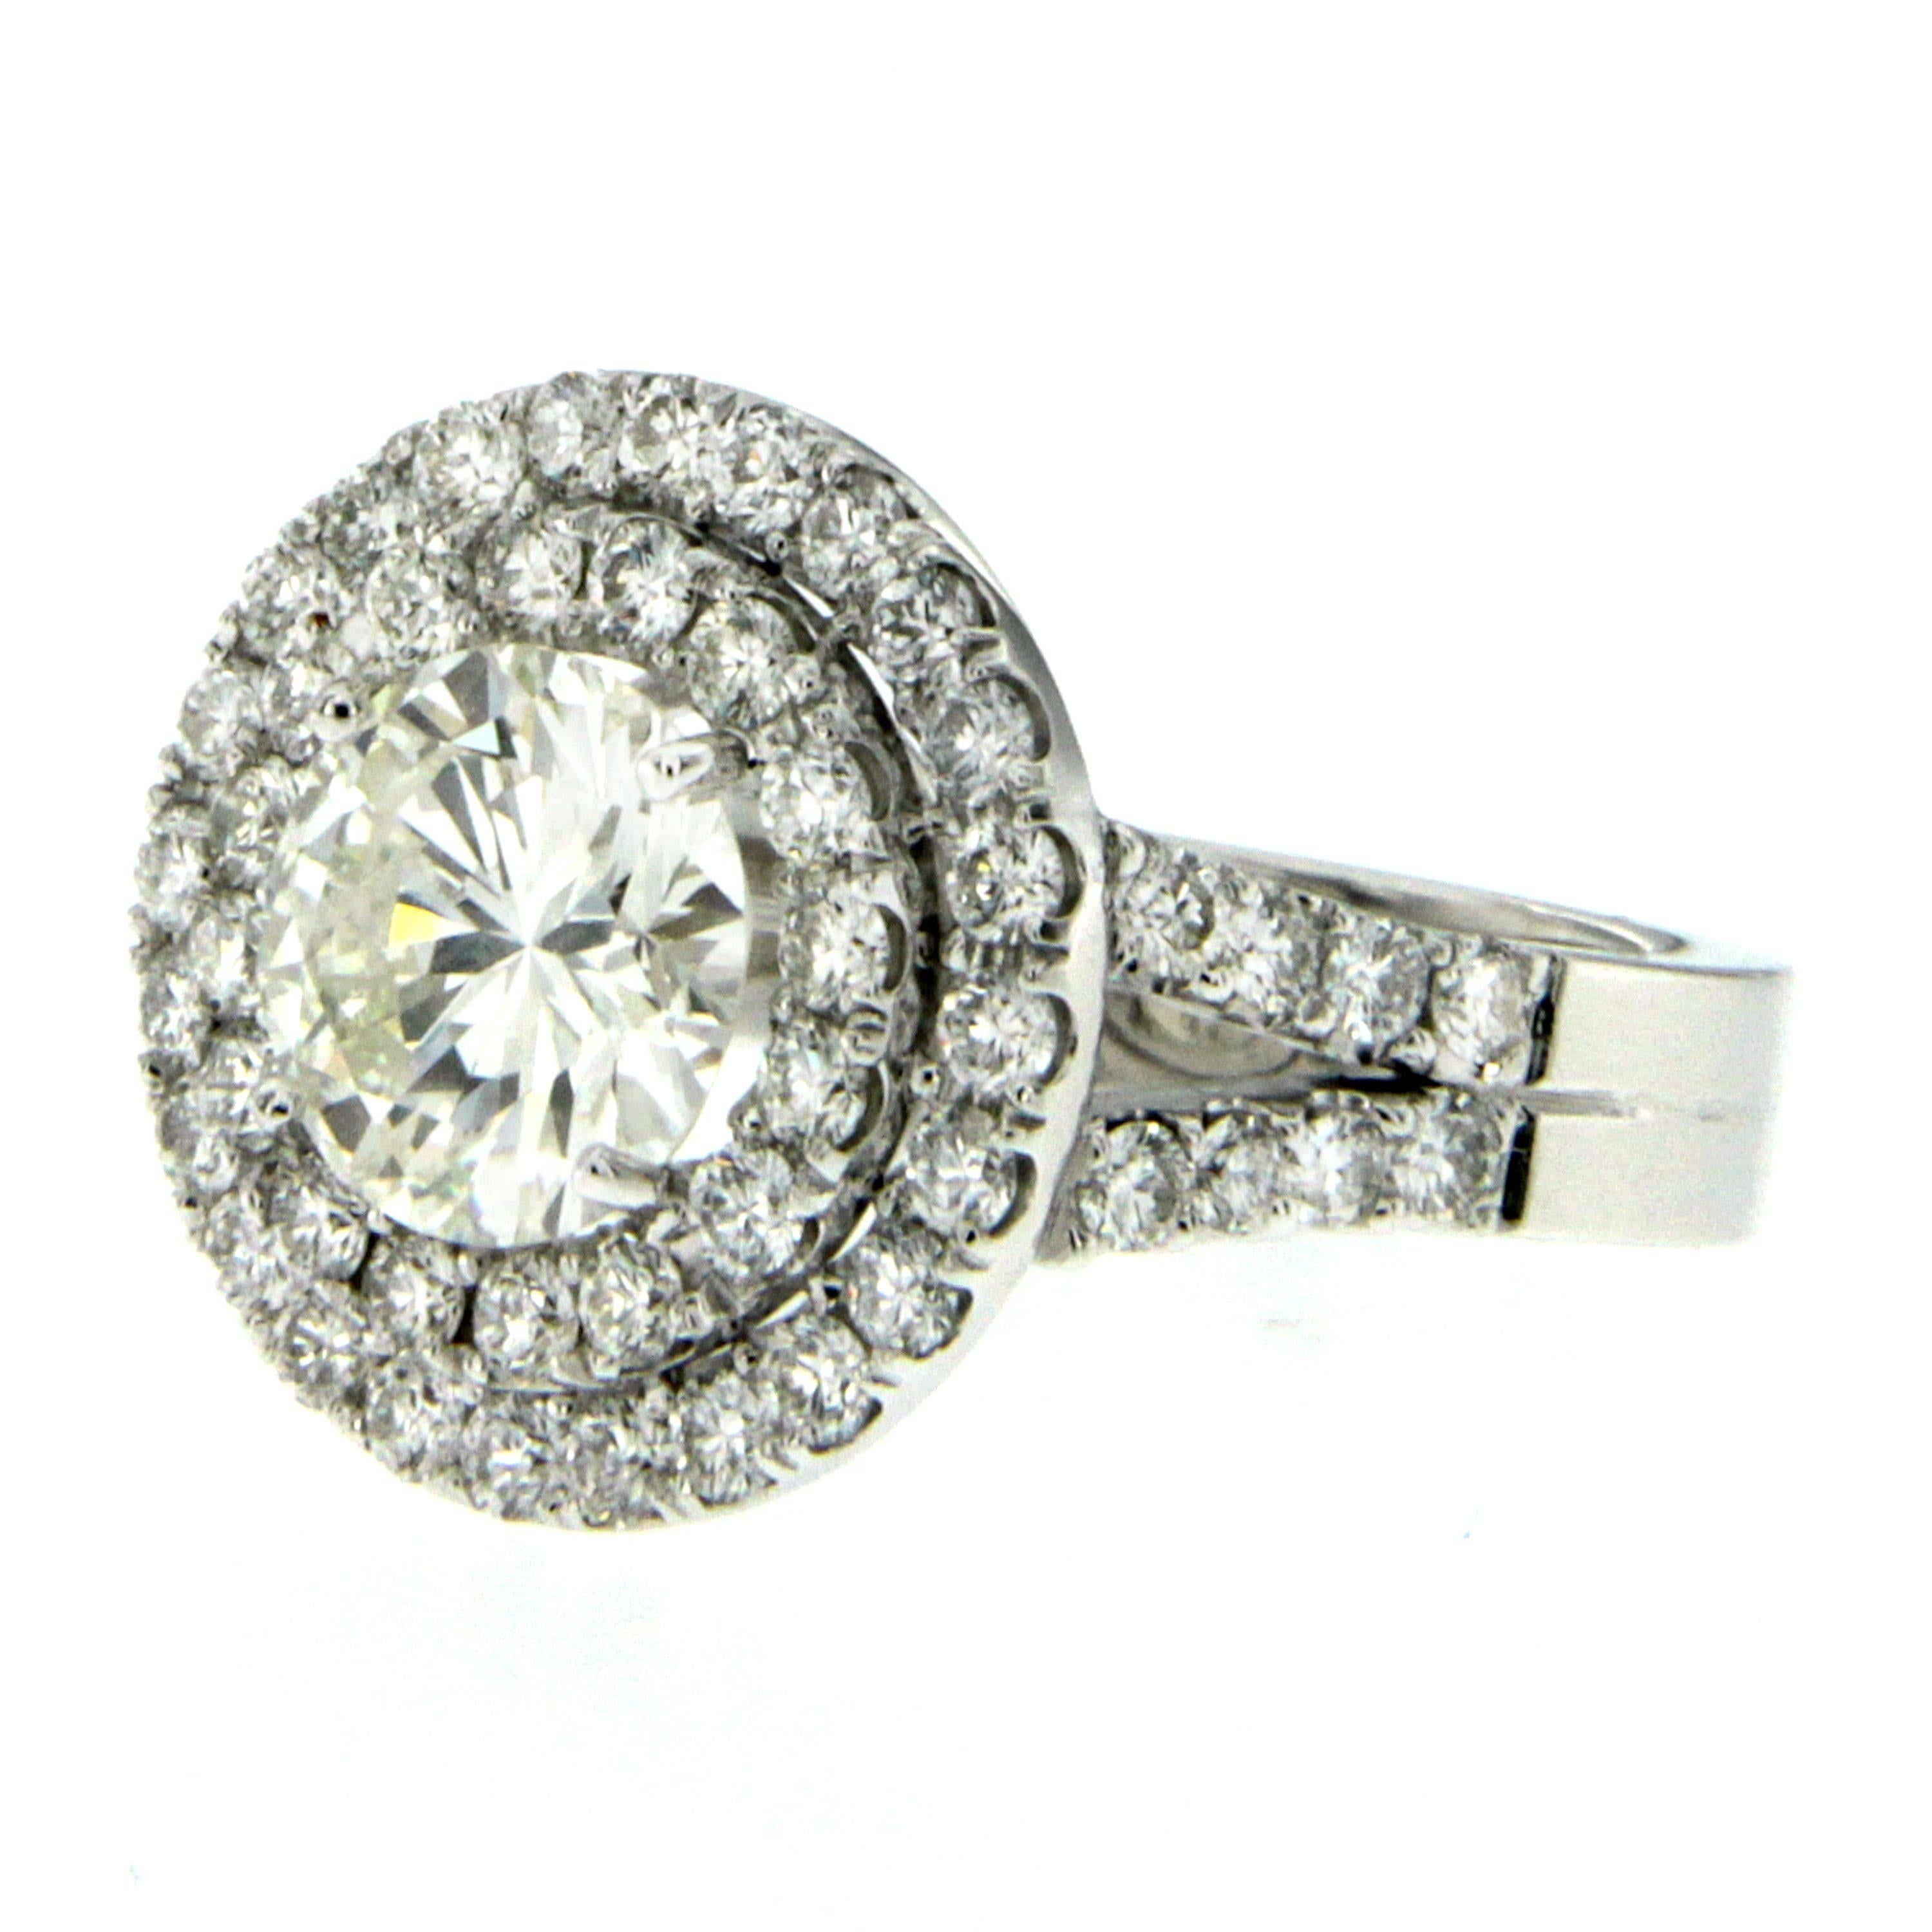 18K White Gold Engagement Ring centered with a gorgeous round brilliant cut Diamond  weighing 2.04 ct graded H color with VS1 clarity. It is set with a double diamond halo, and a diamond split shank with diamonds halfway down weighing approximately